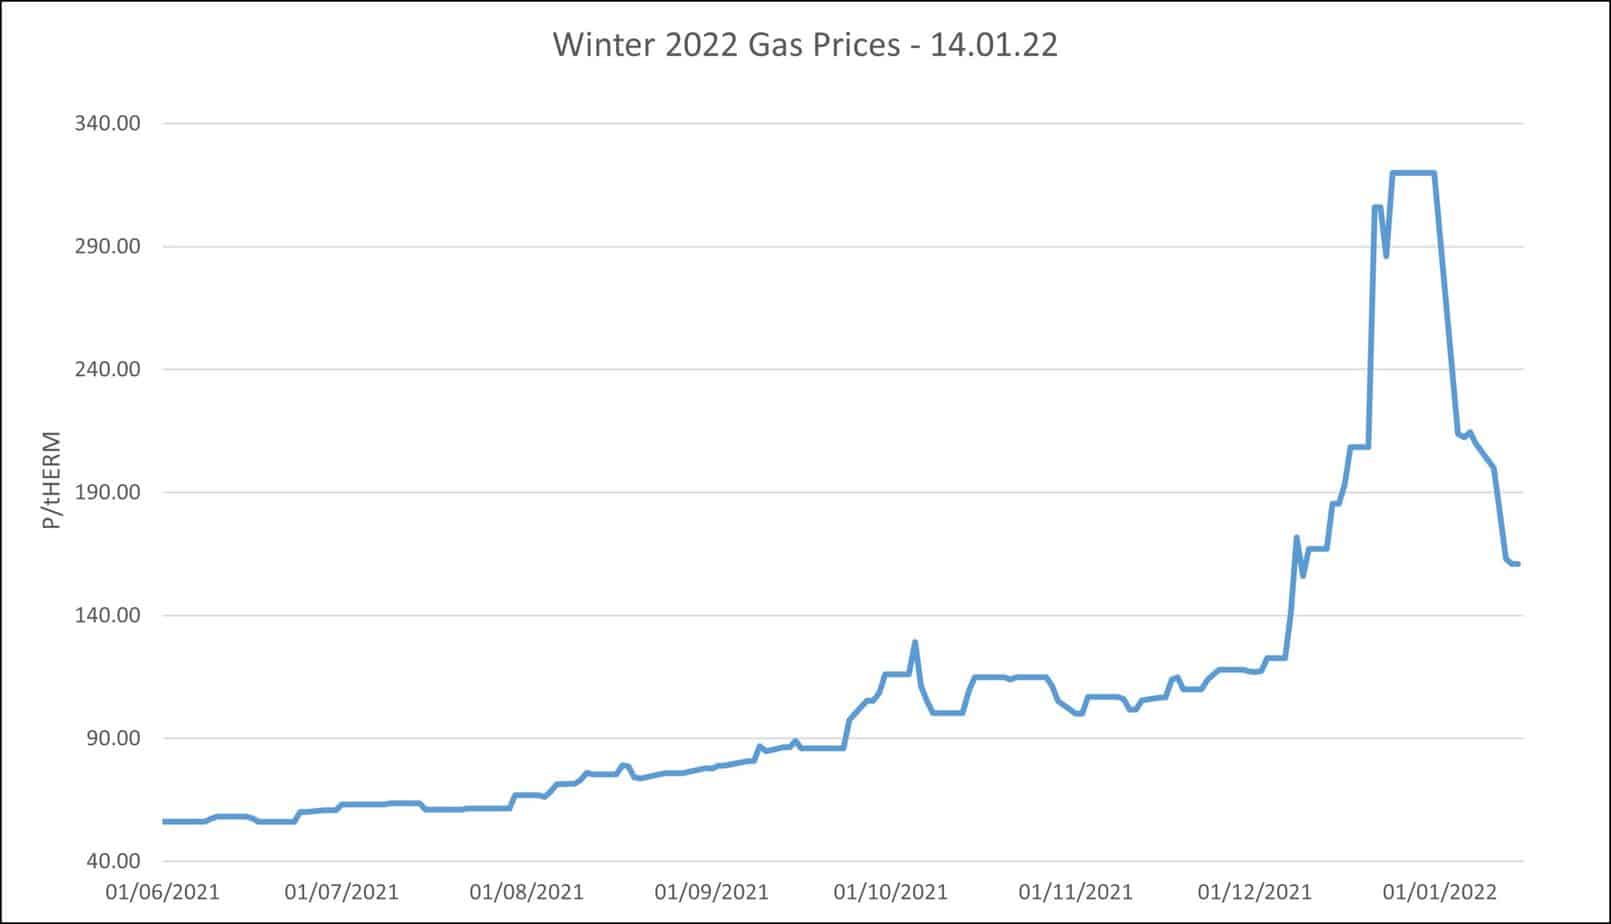 Win22 Gas Prices - 14.01.22